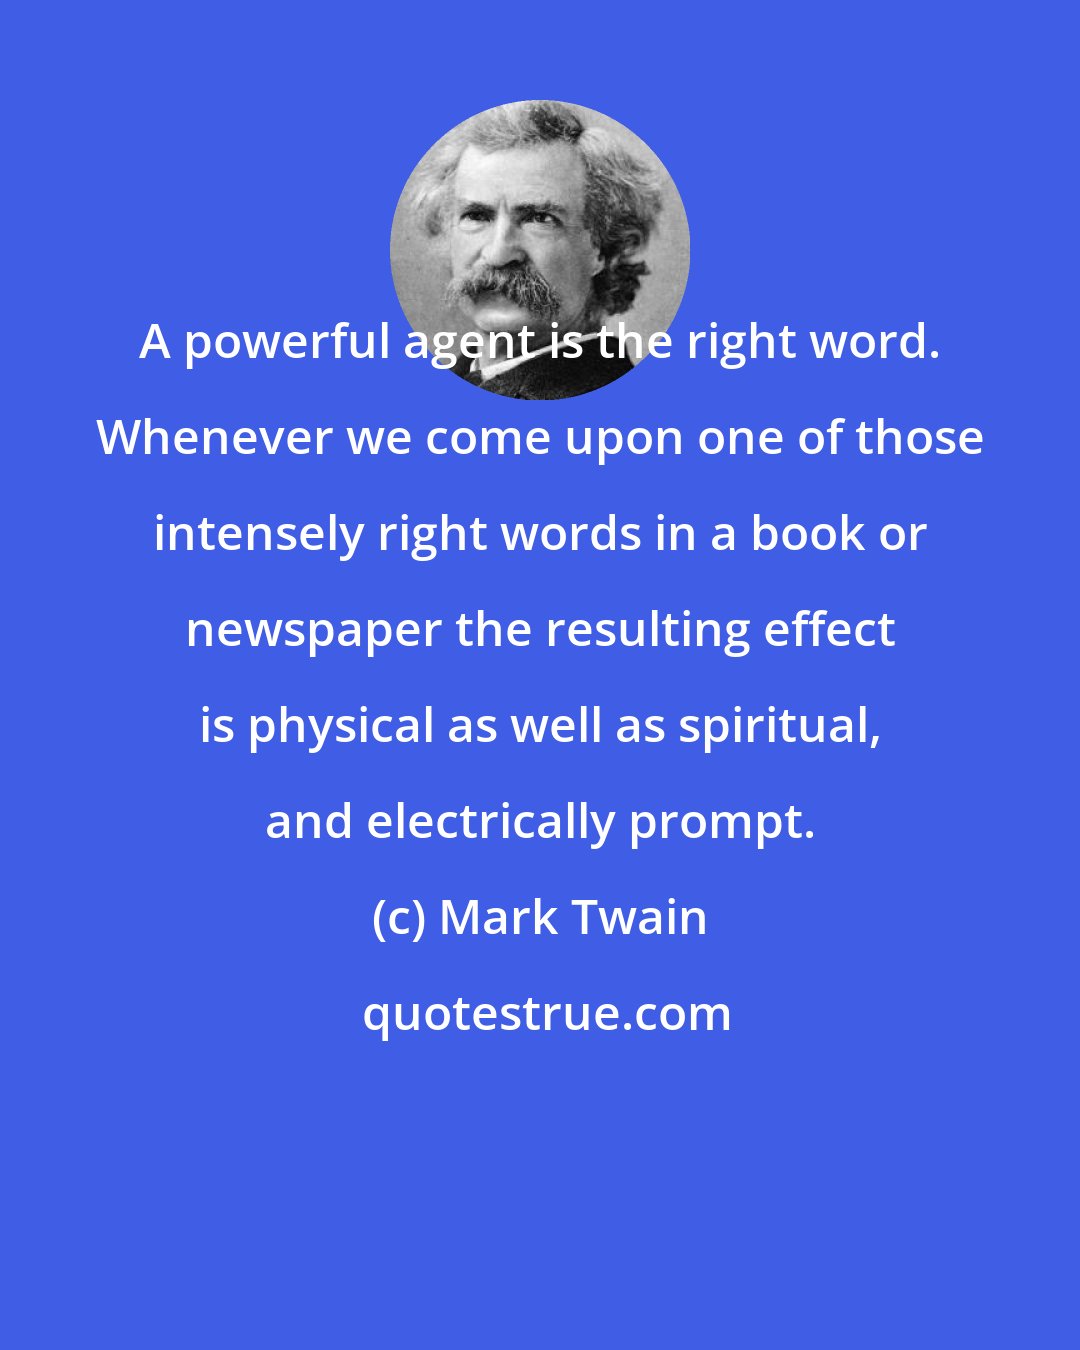 Mark Twain: A powerful agent is the right word. Whenever we come upon one of those intensely right words in a book or newspaper the resulting effect is physical as well as spiritual, and electrically prompt.